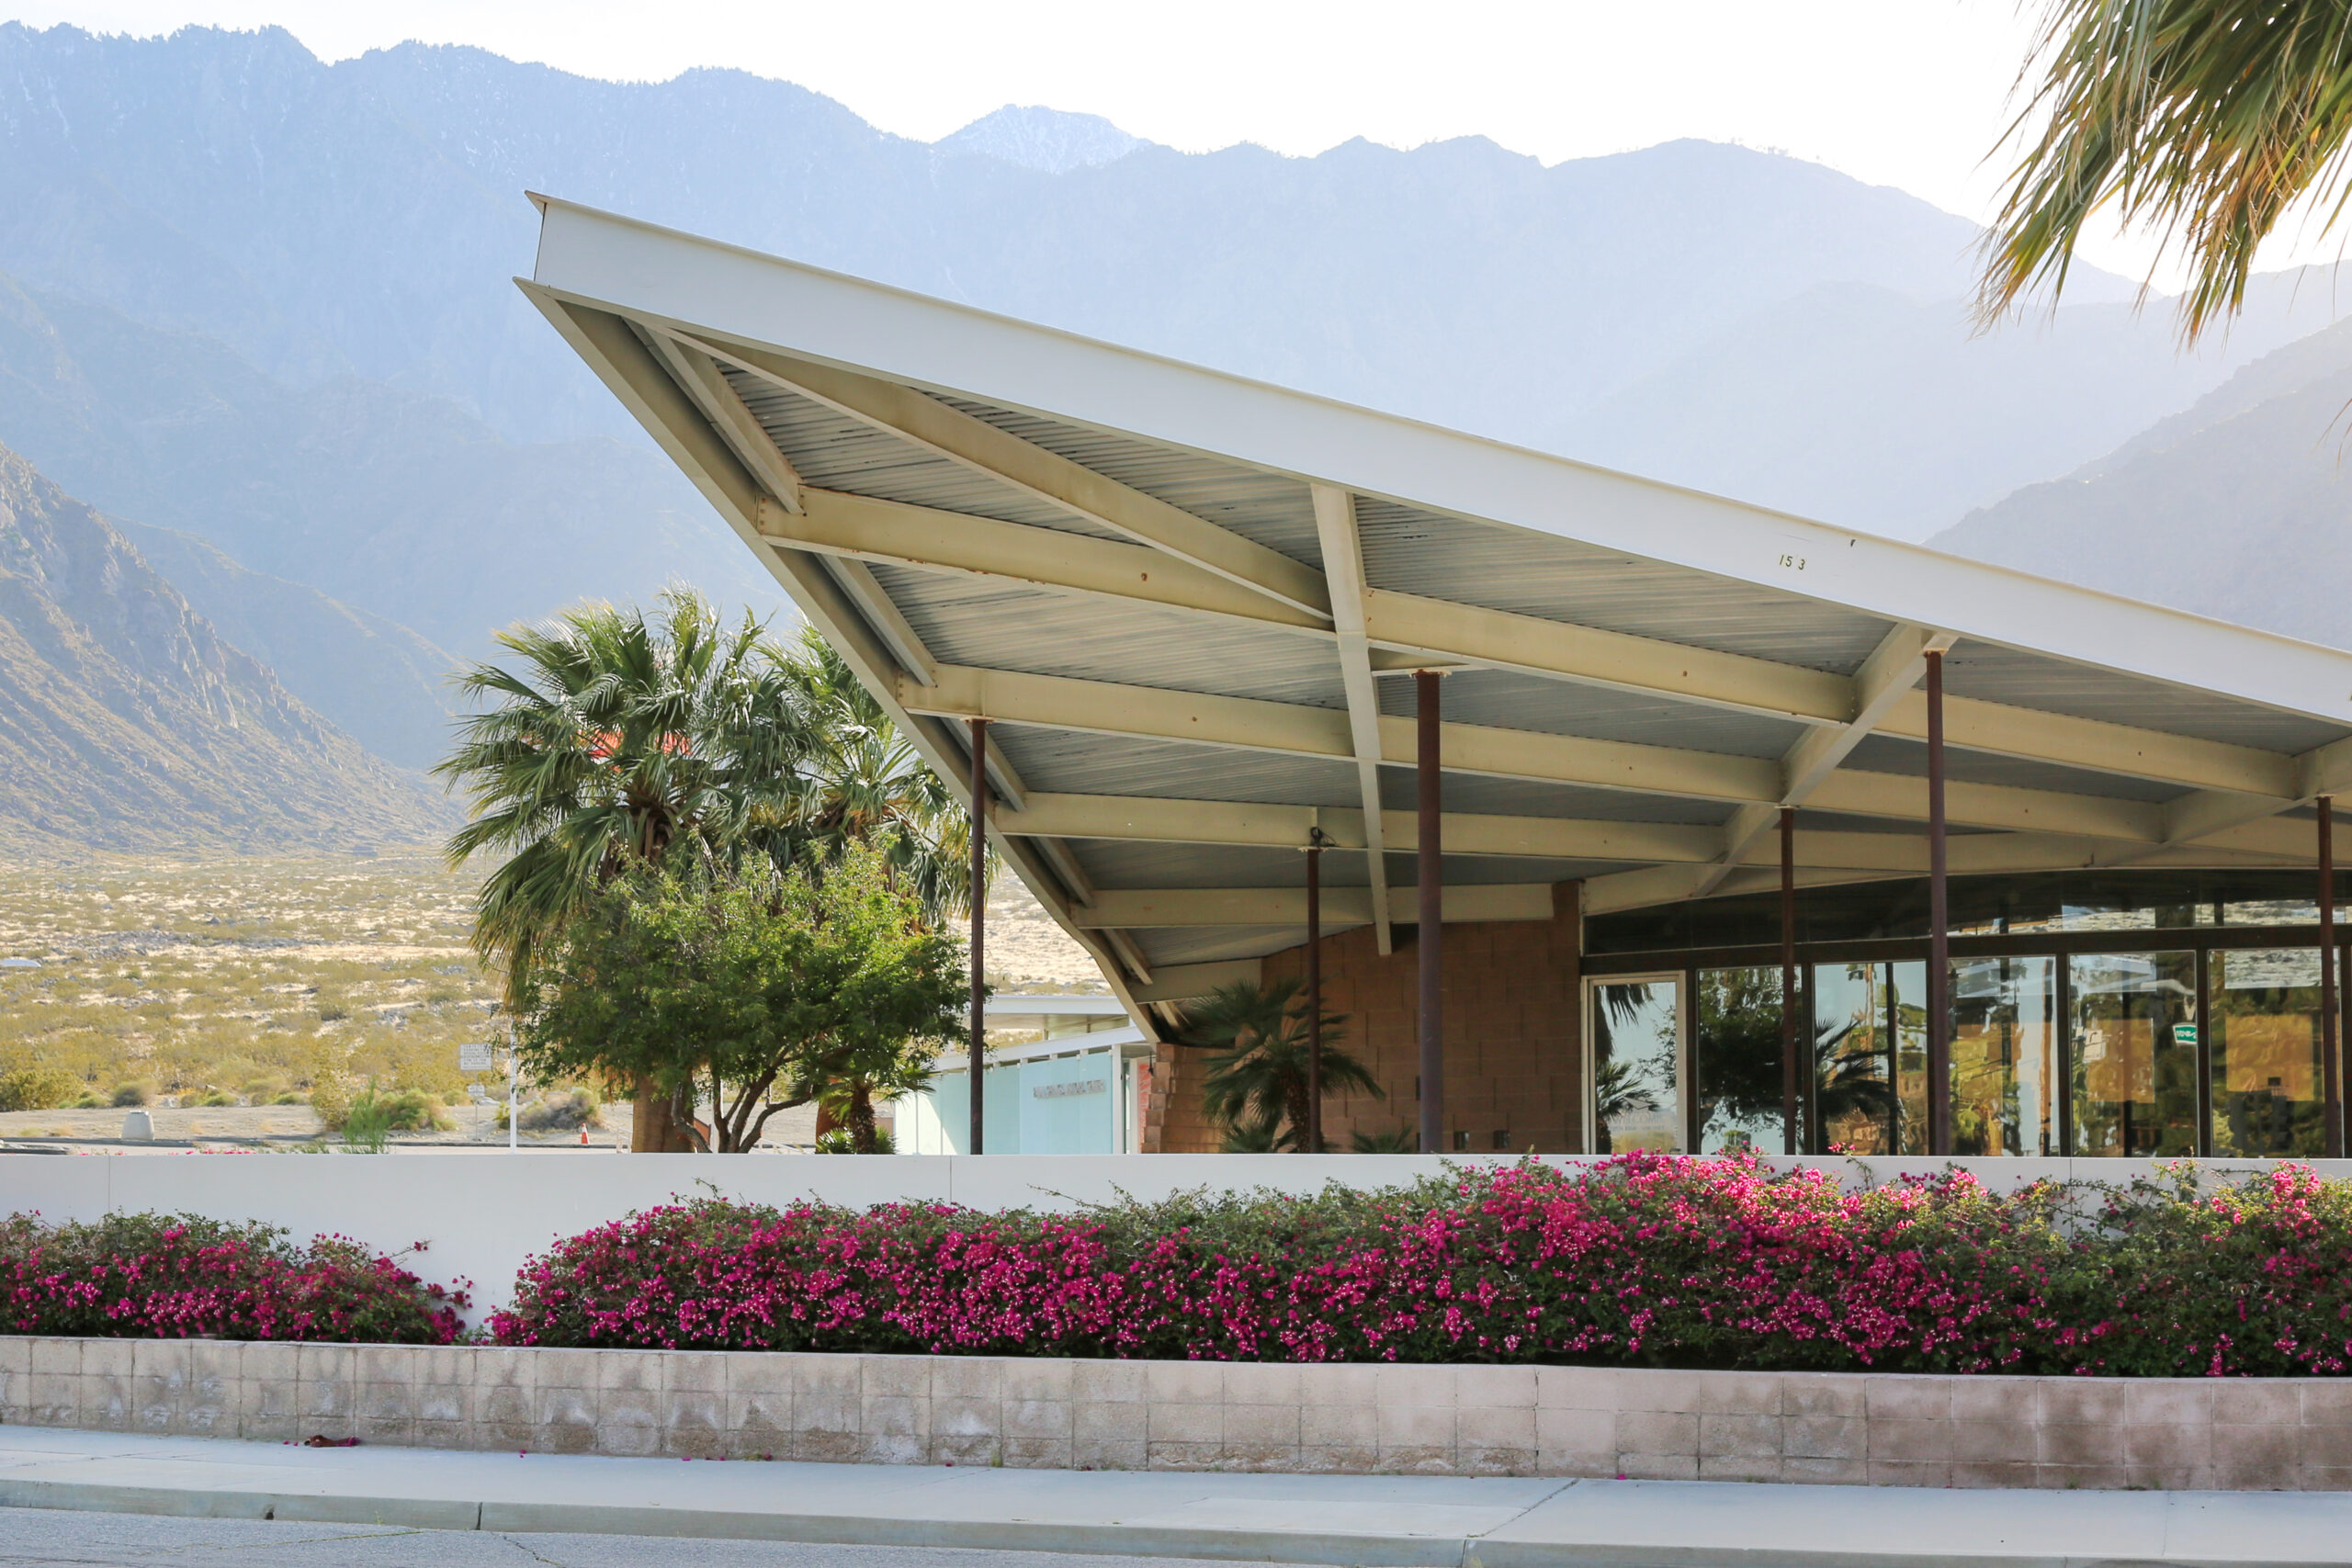 Exterior view of the Palm Springs Visitor Center's iconic triangular roofline.